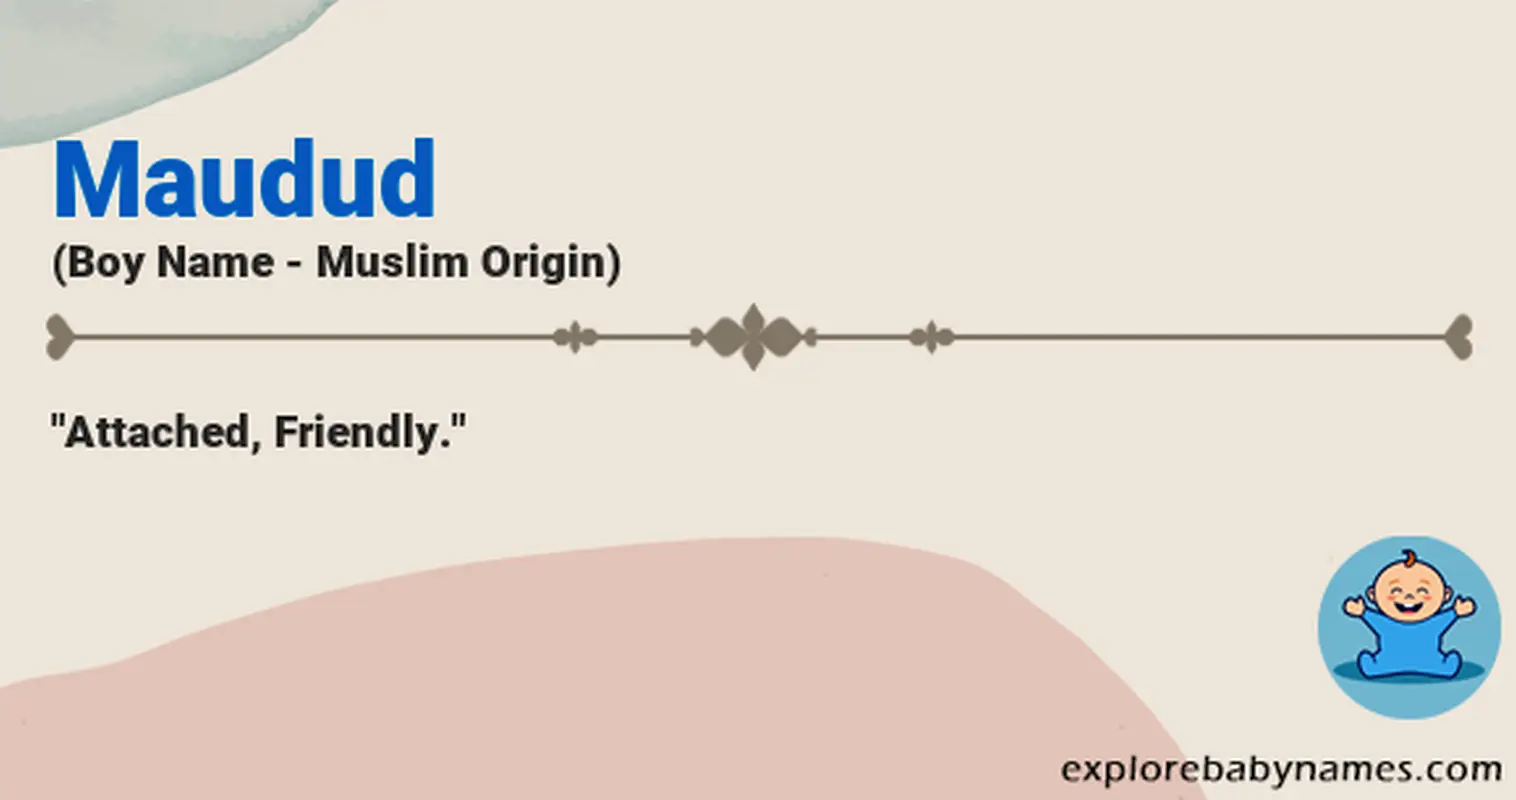 Meaning of Maudud